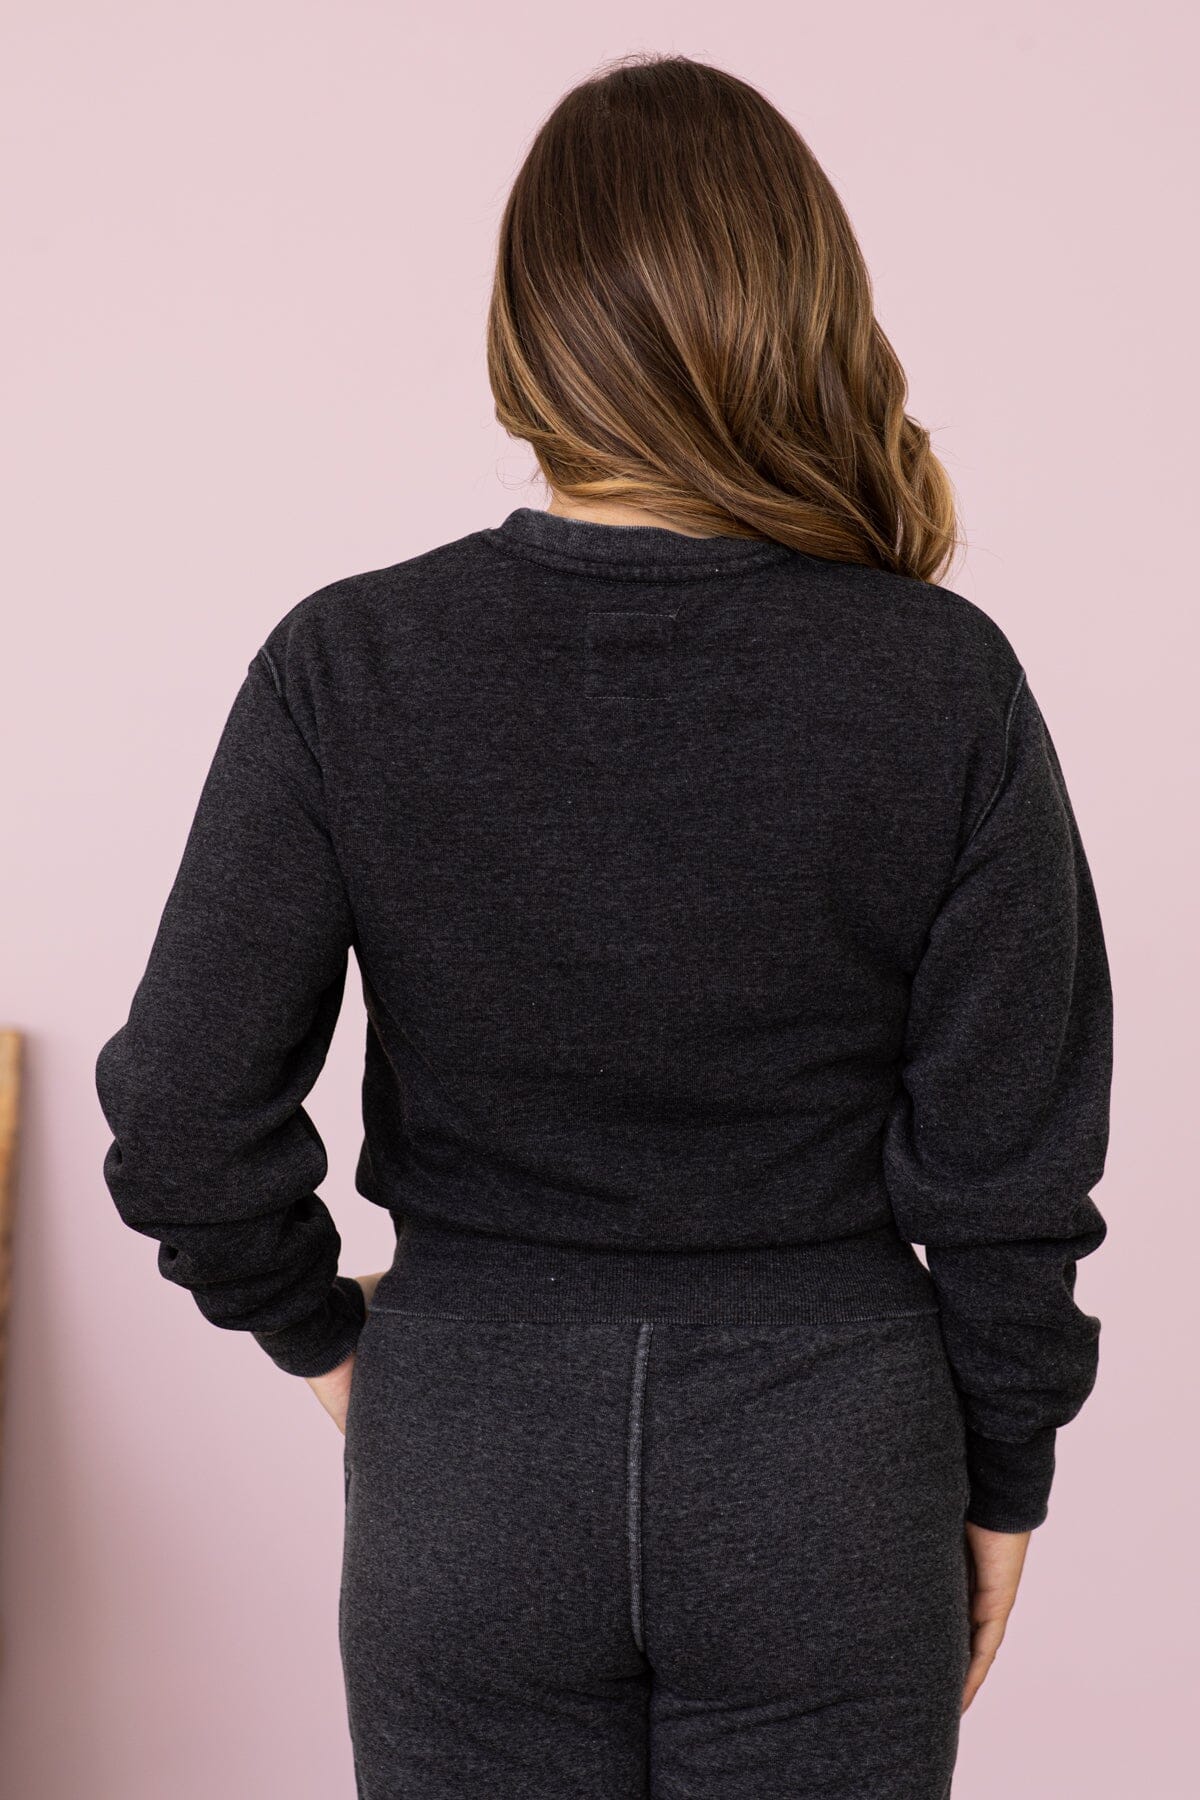 Charcoal Burnout Sweatshirt - Filly Flair